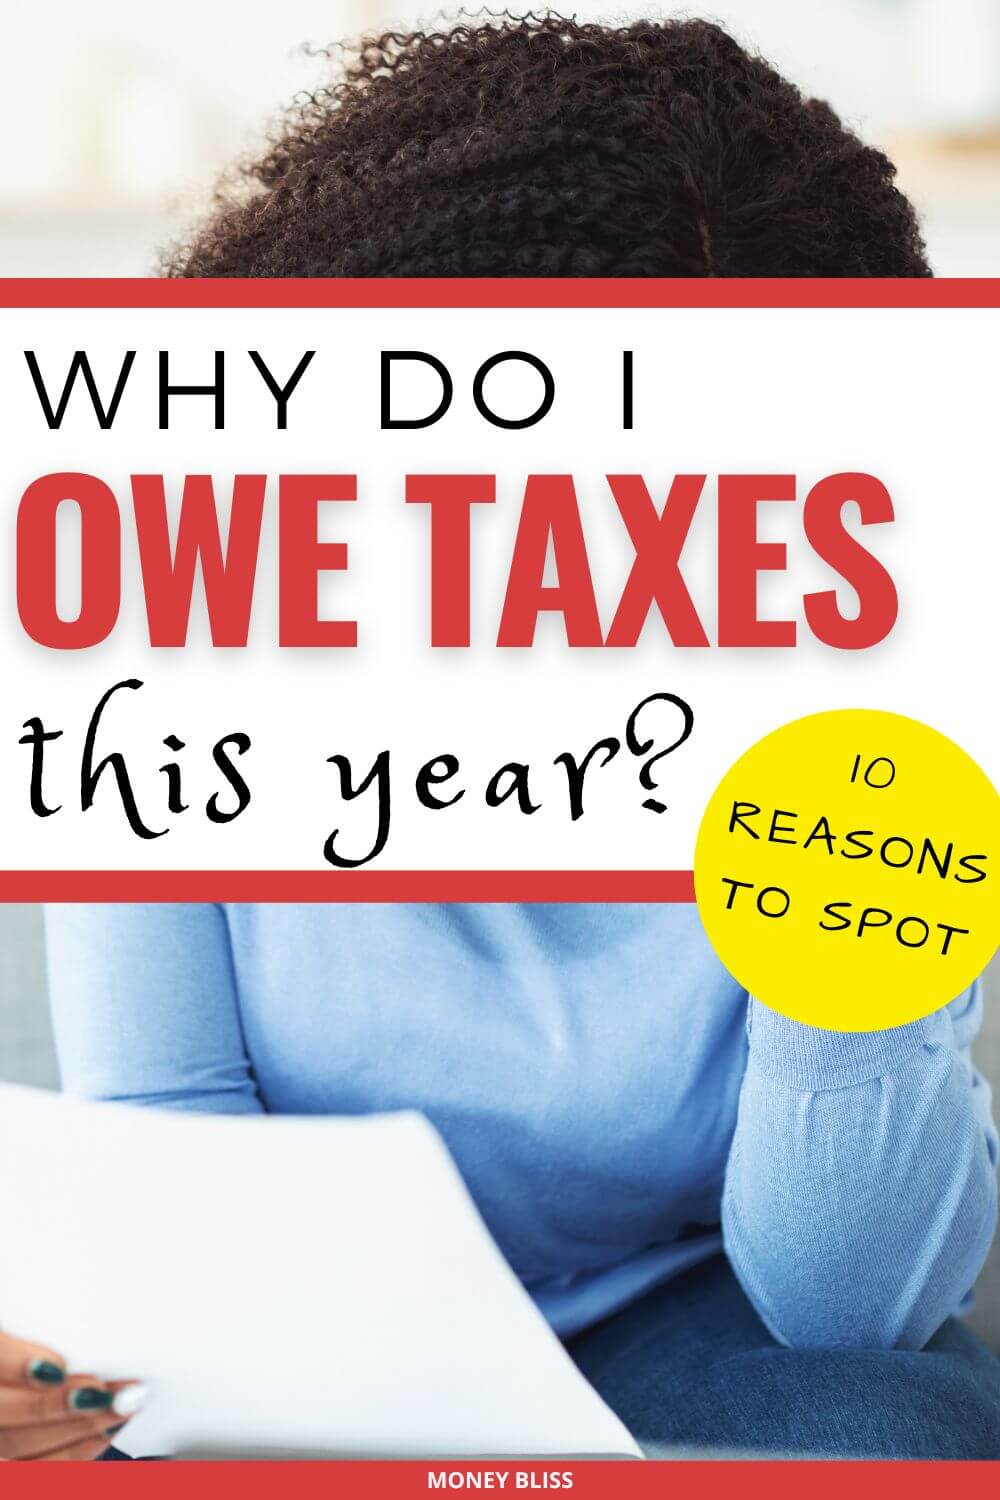 Why Do I Owe Taxes This Year? 10 Reasons To Spot Hanover Mortgages